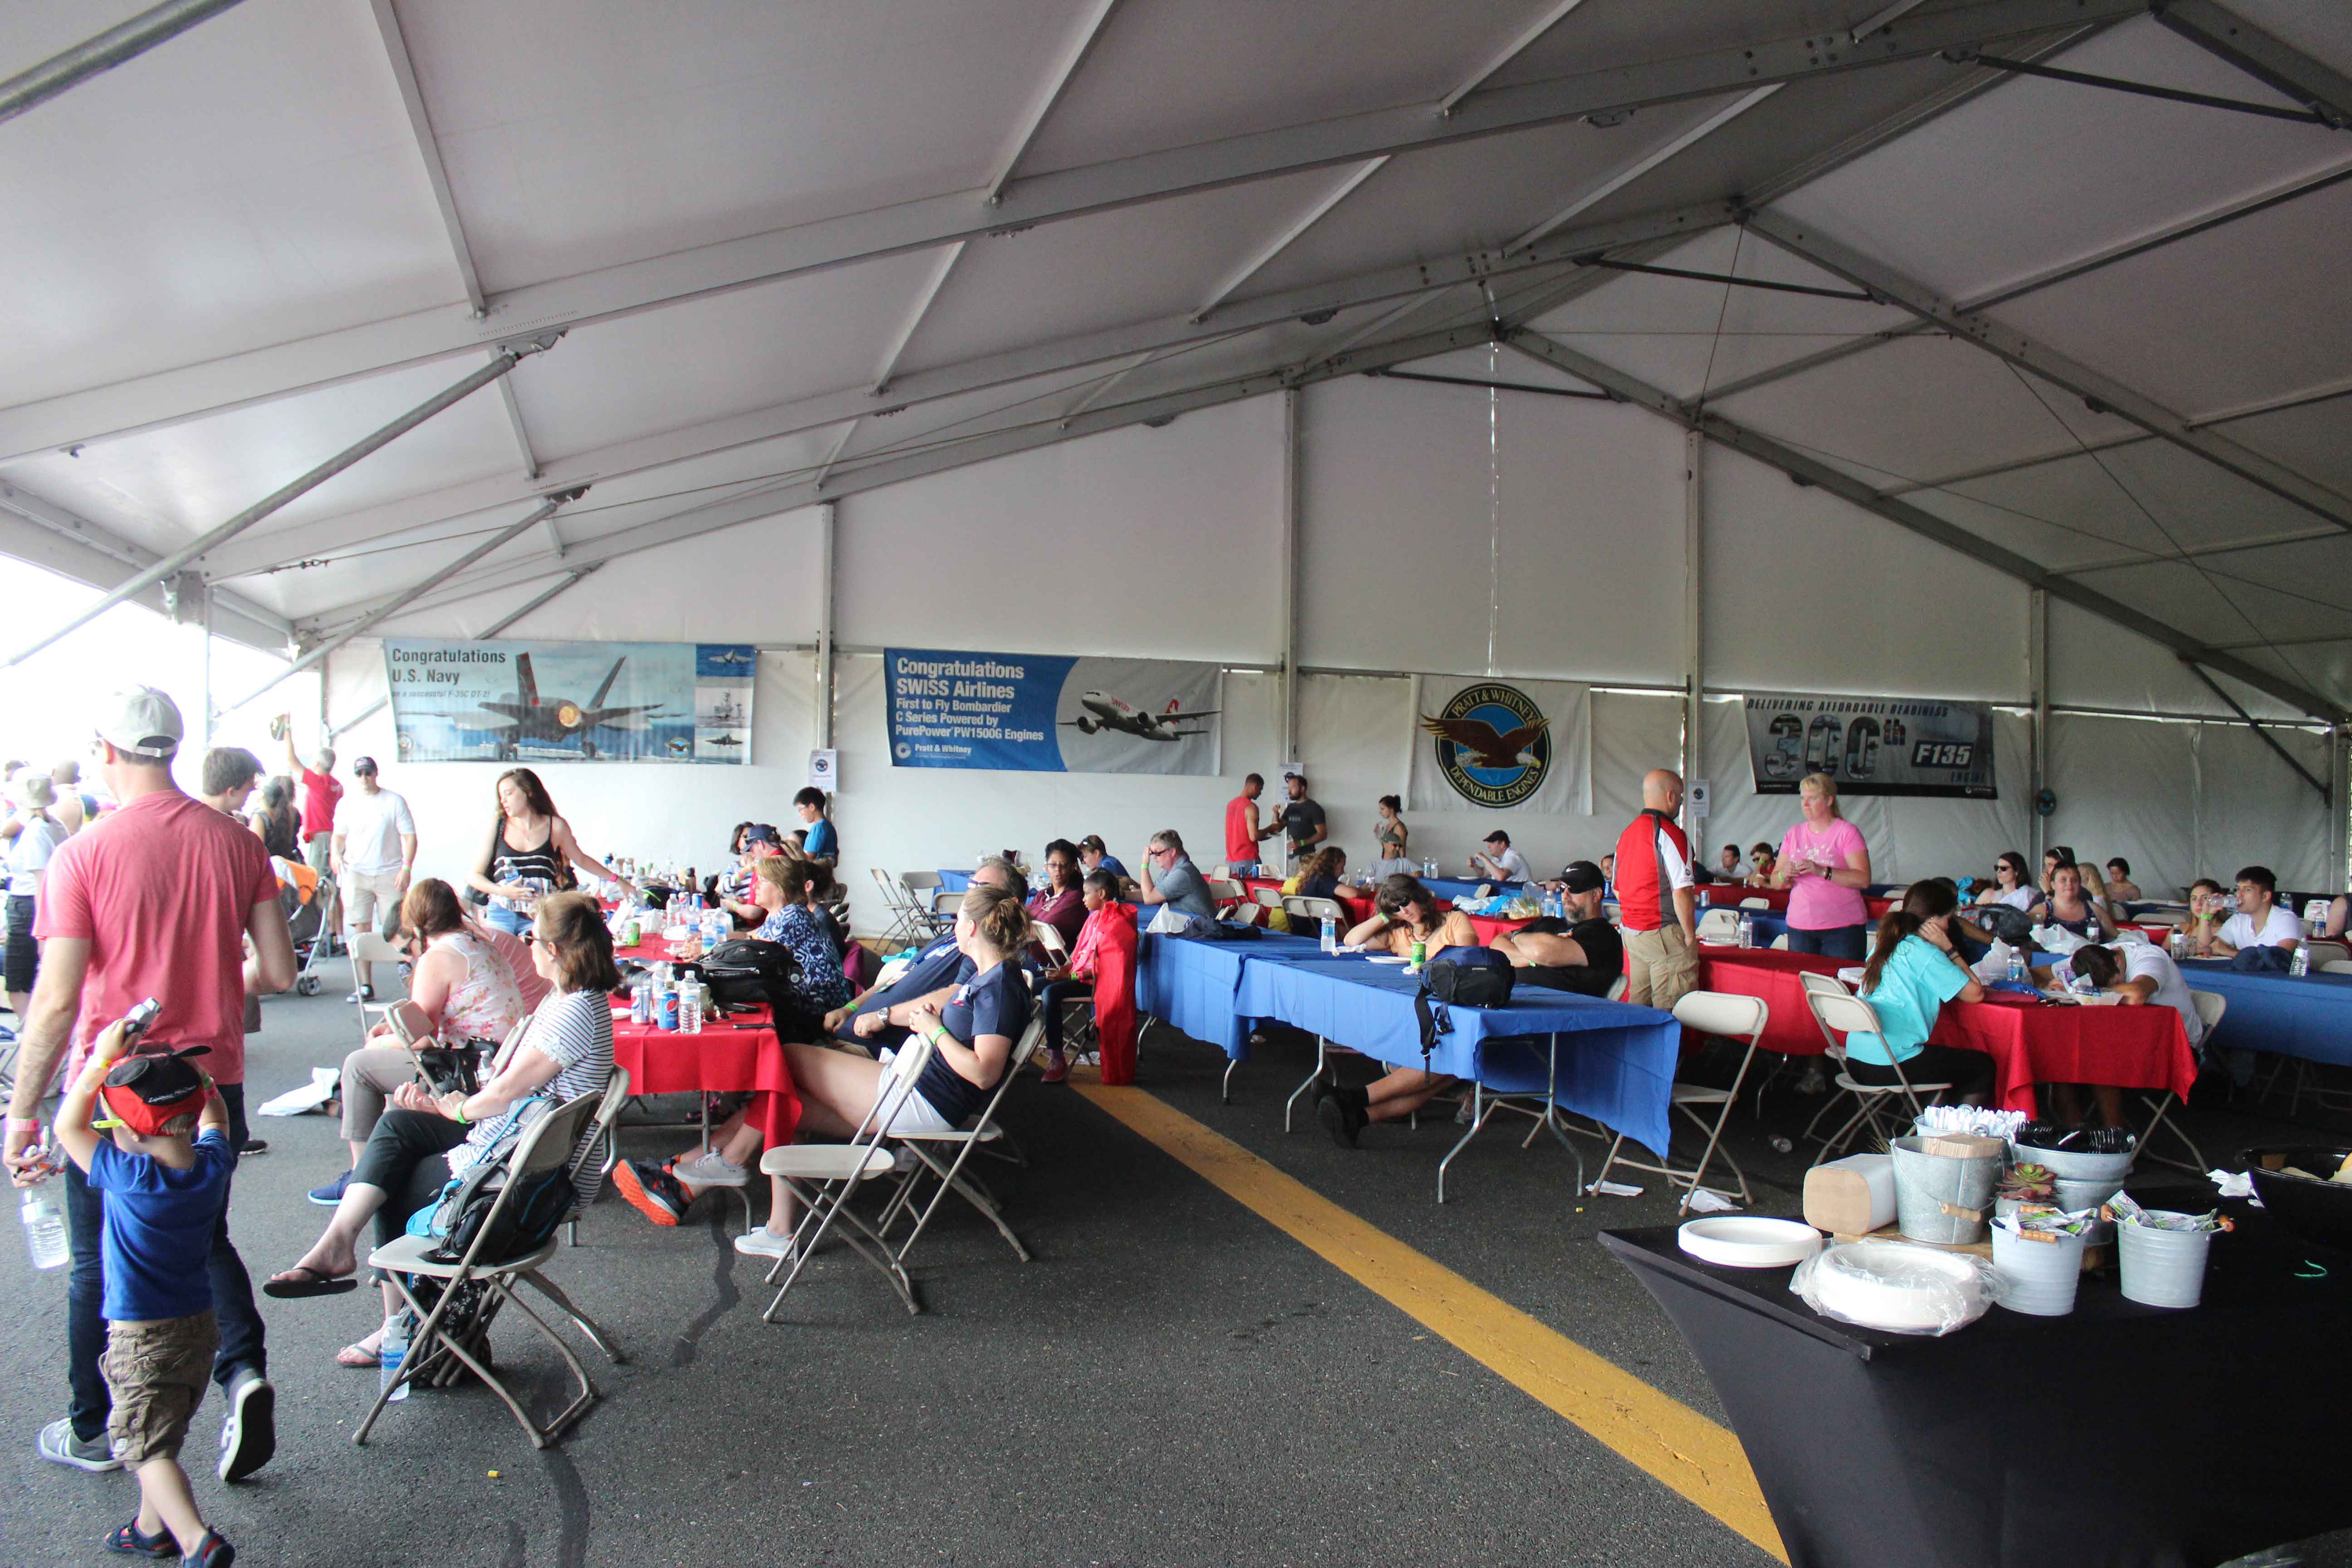 People inside a large white tent sitting at long tables watching an air show, there are posters for Pratt and Whitney hanging on the walls of the tent